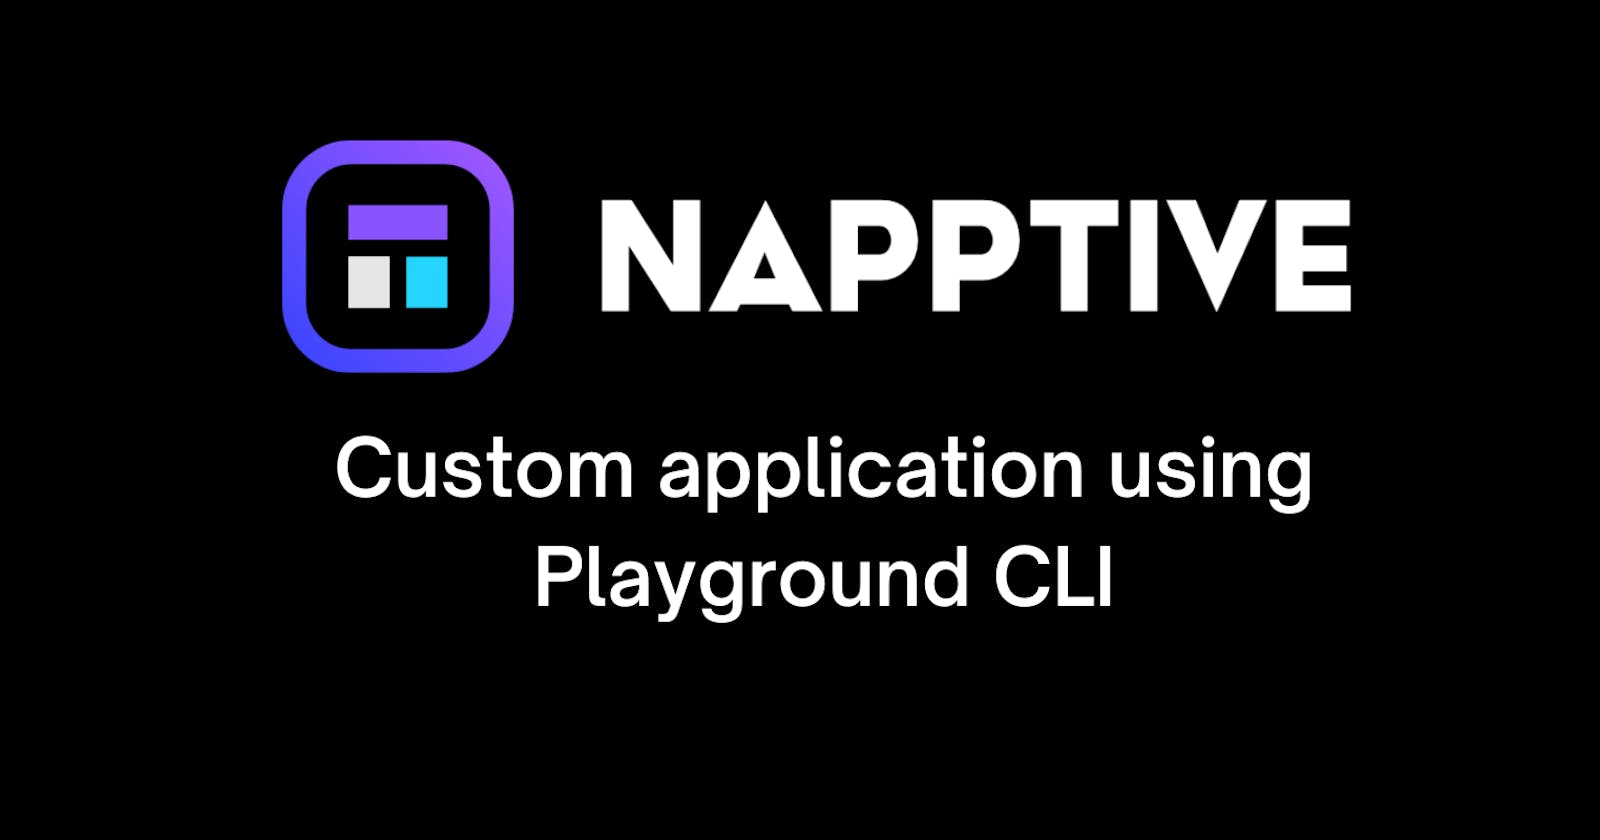 How to deploy custom application on Napptive using Playground CLI